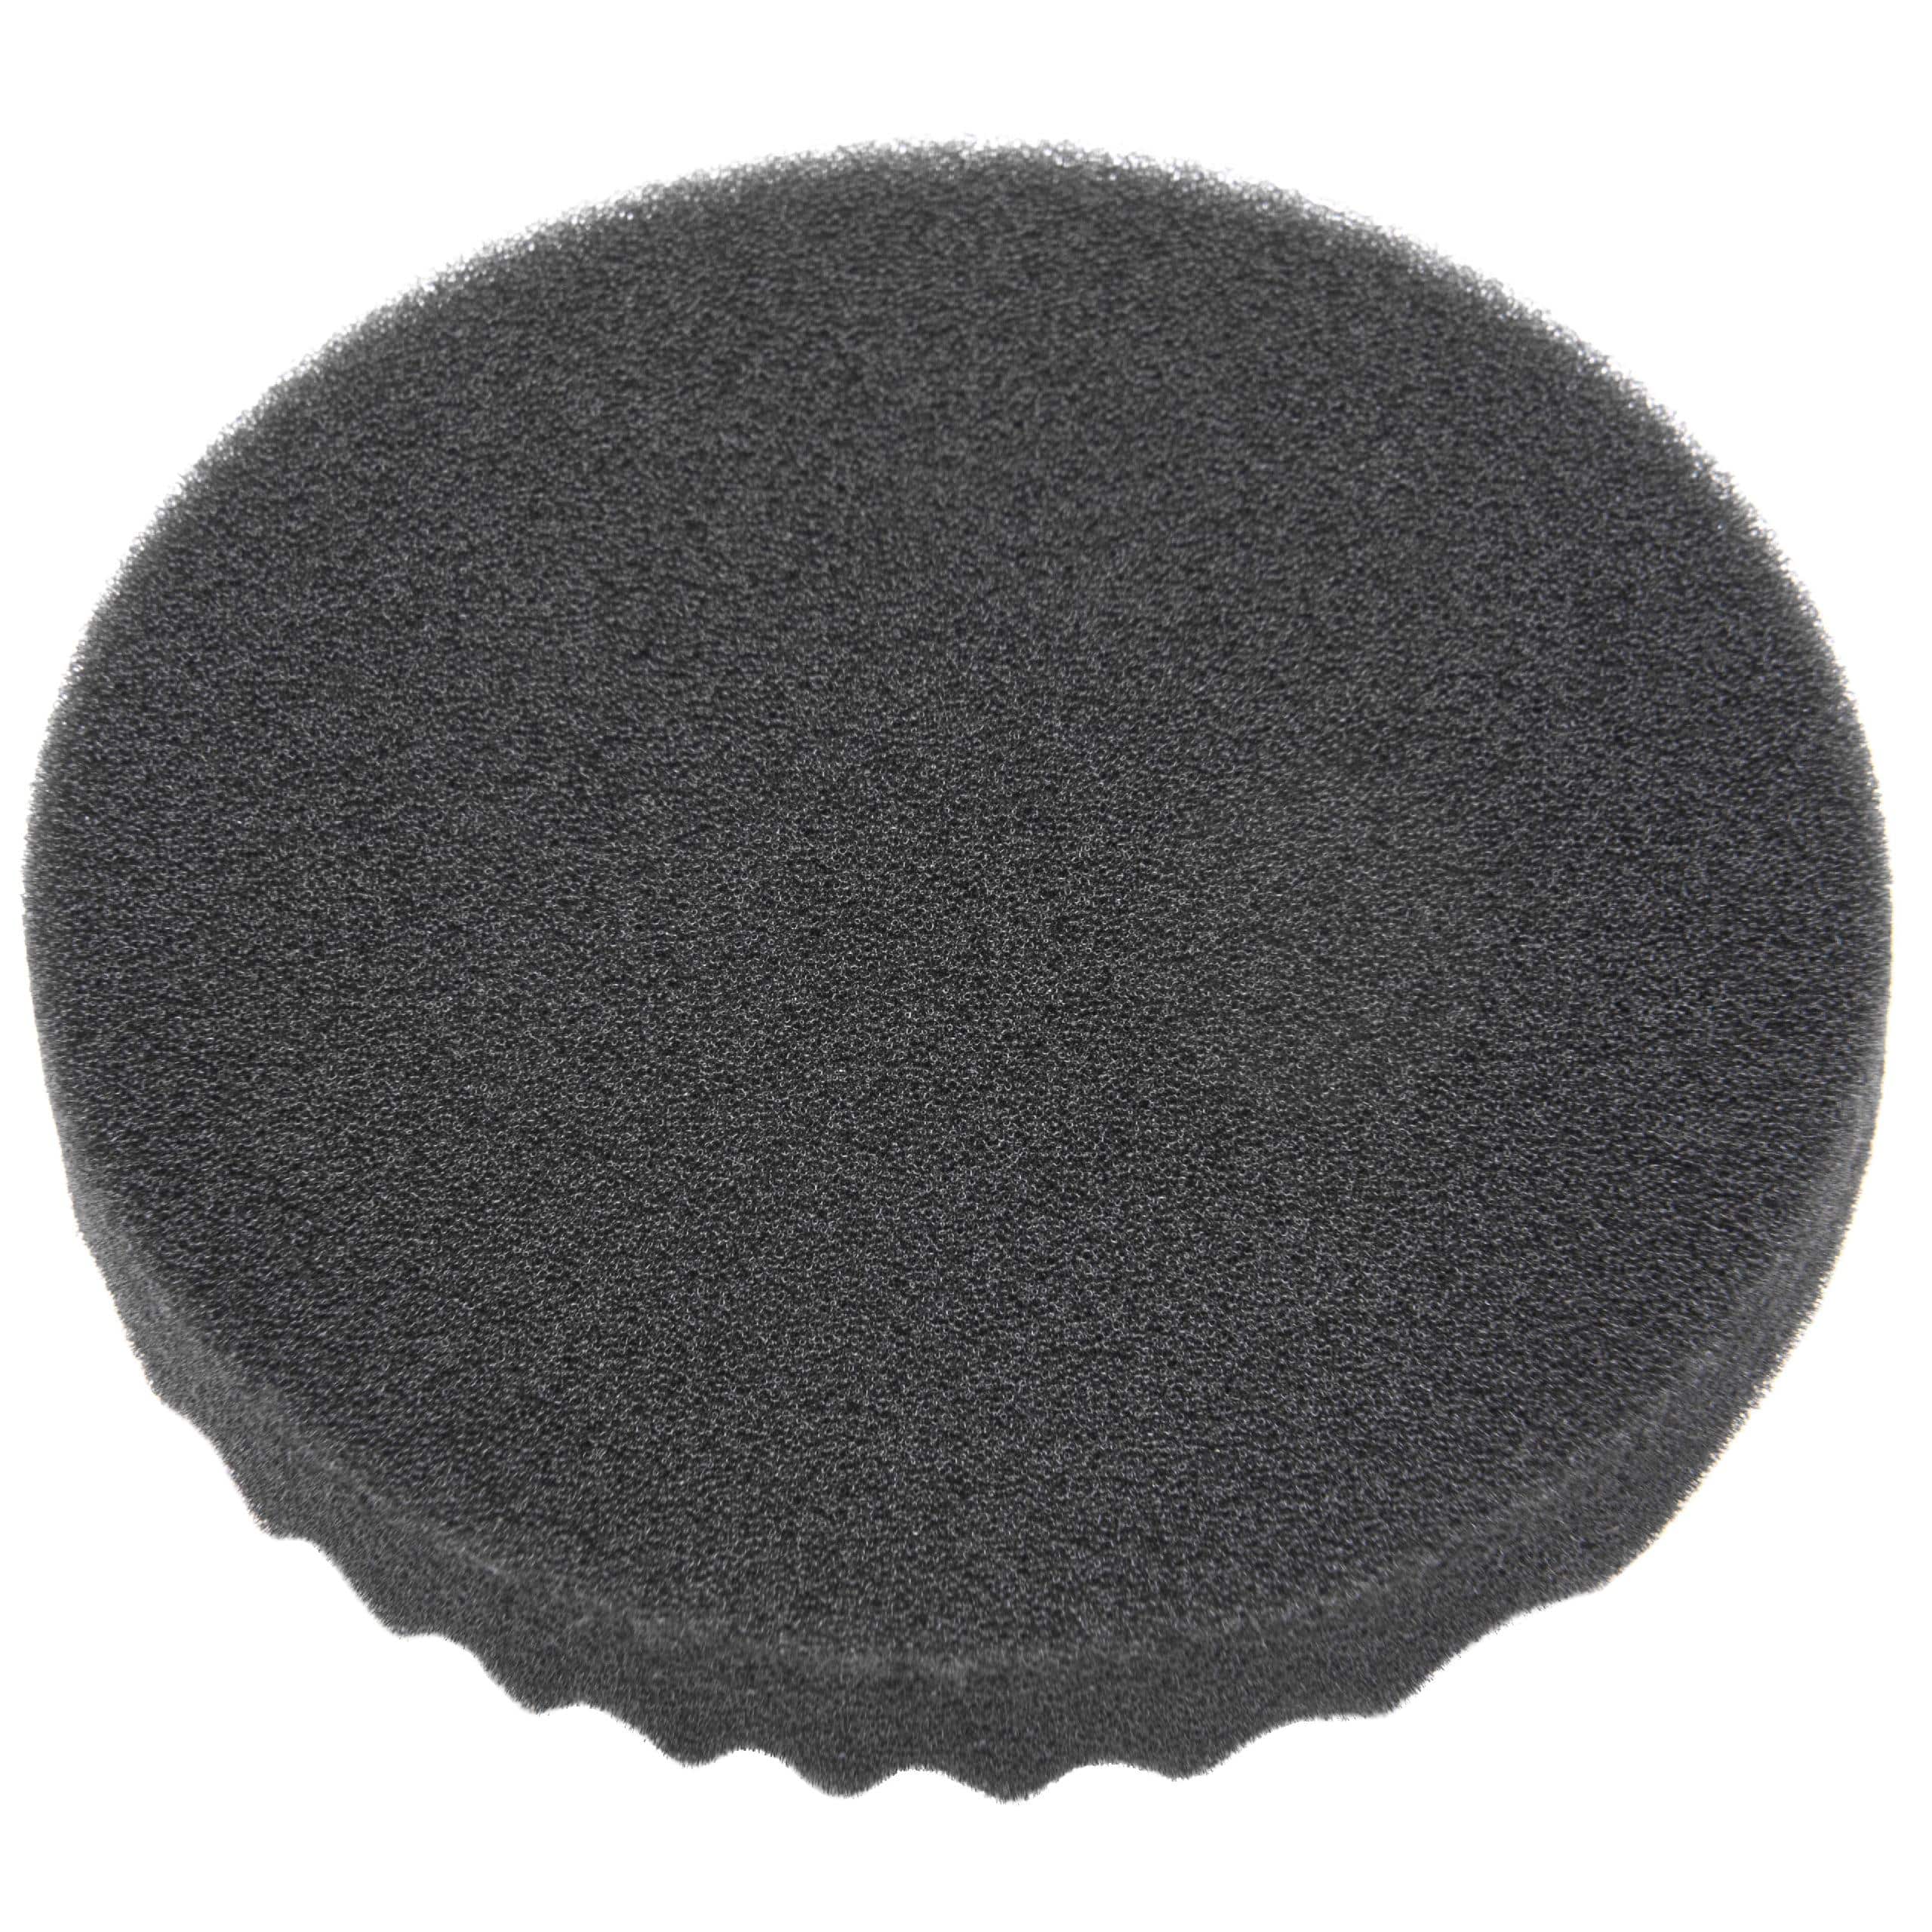 1x foam filter replaces Rowenta RS-RH5473 for RowentaVacuum Cleaner